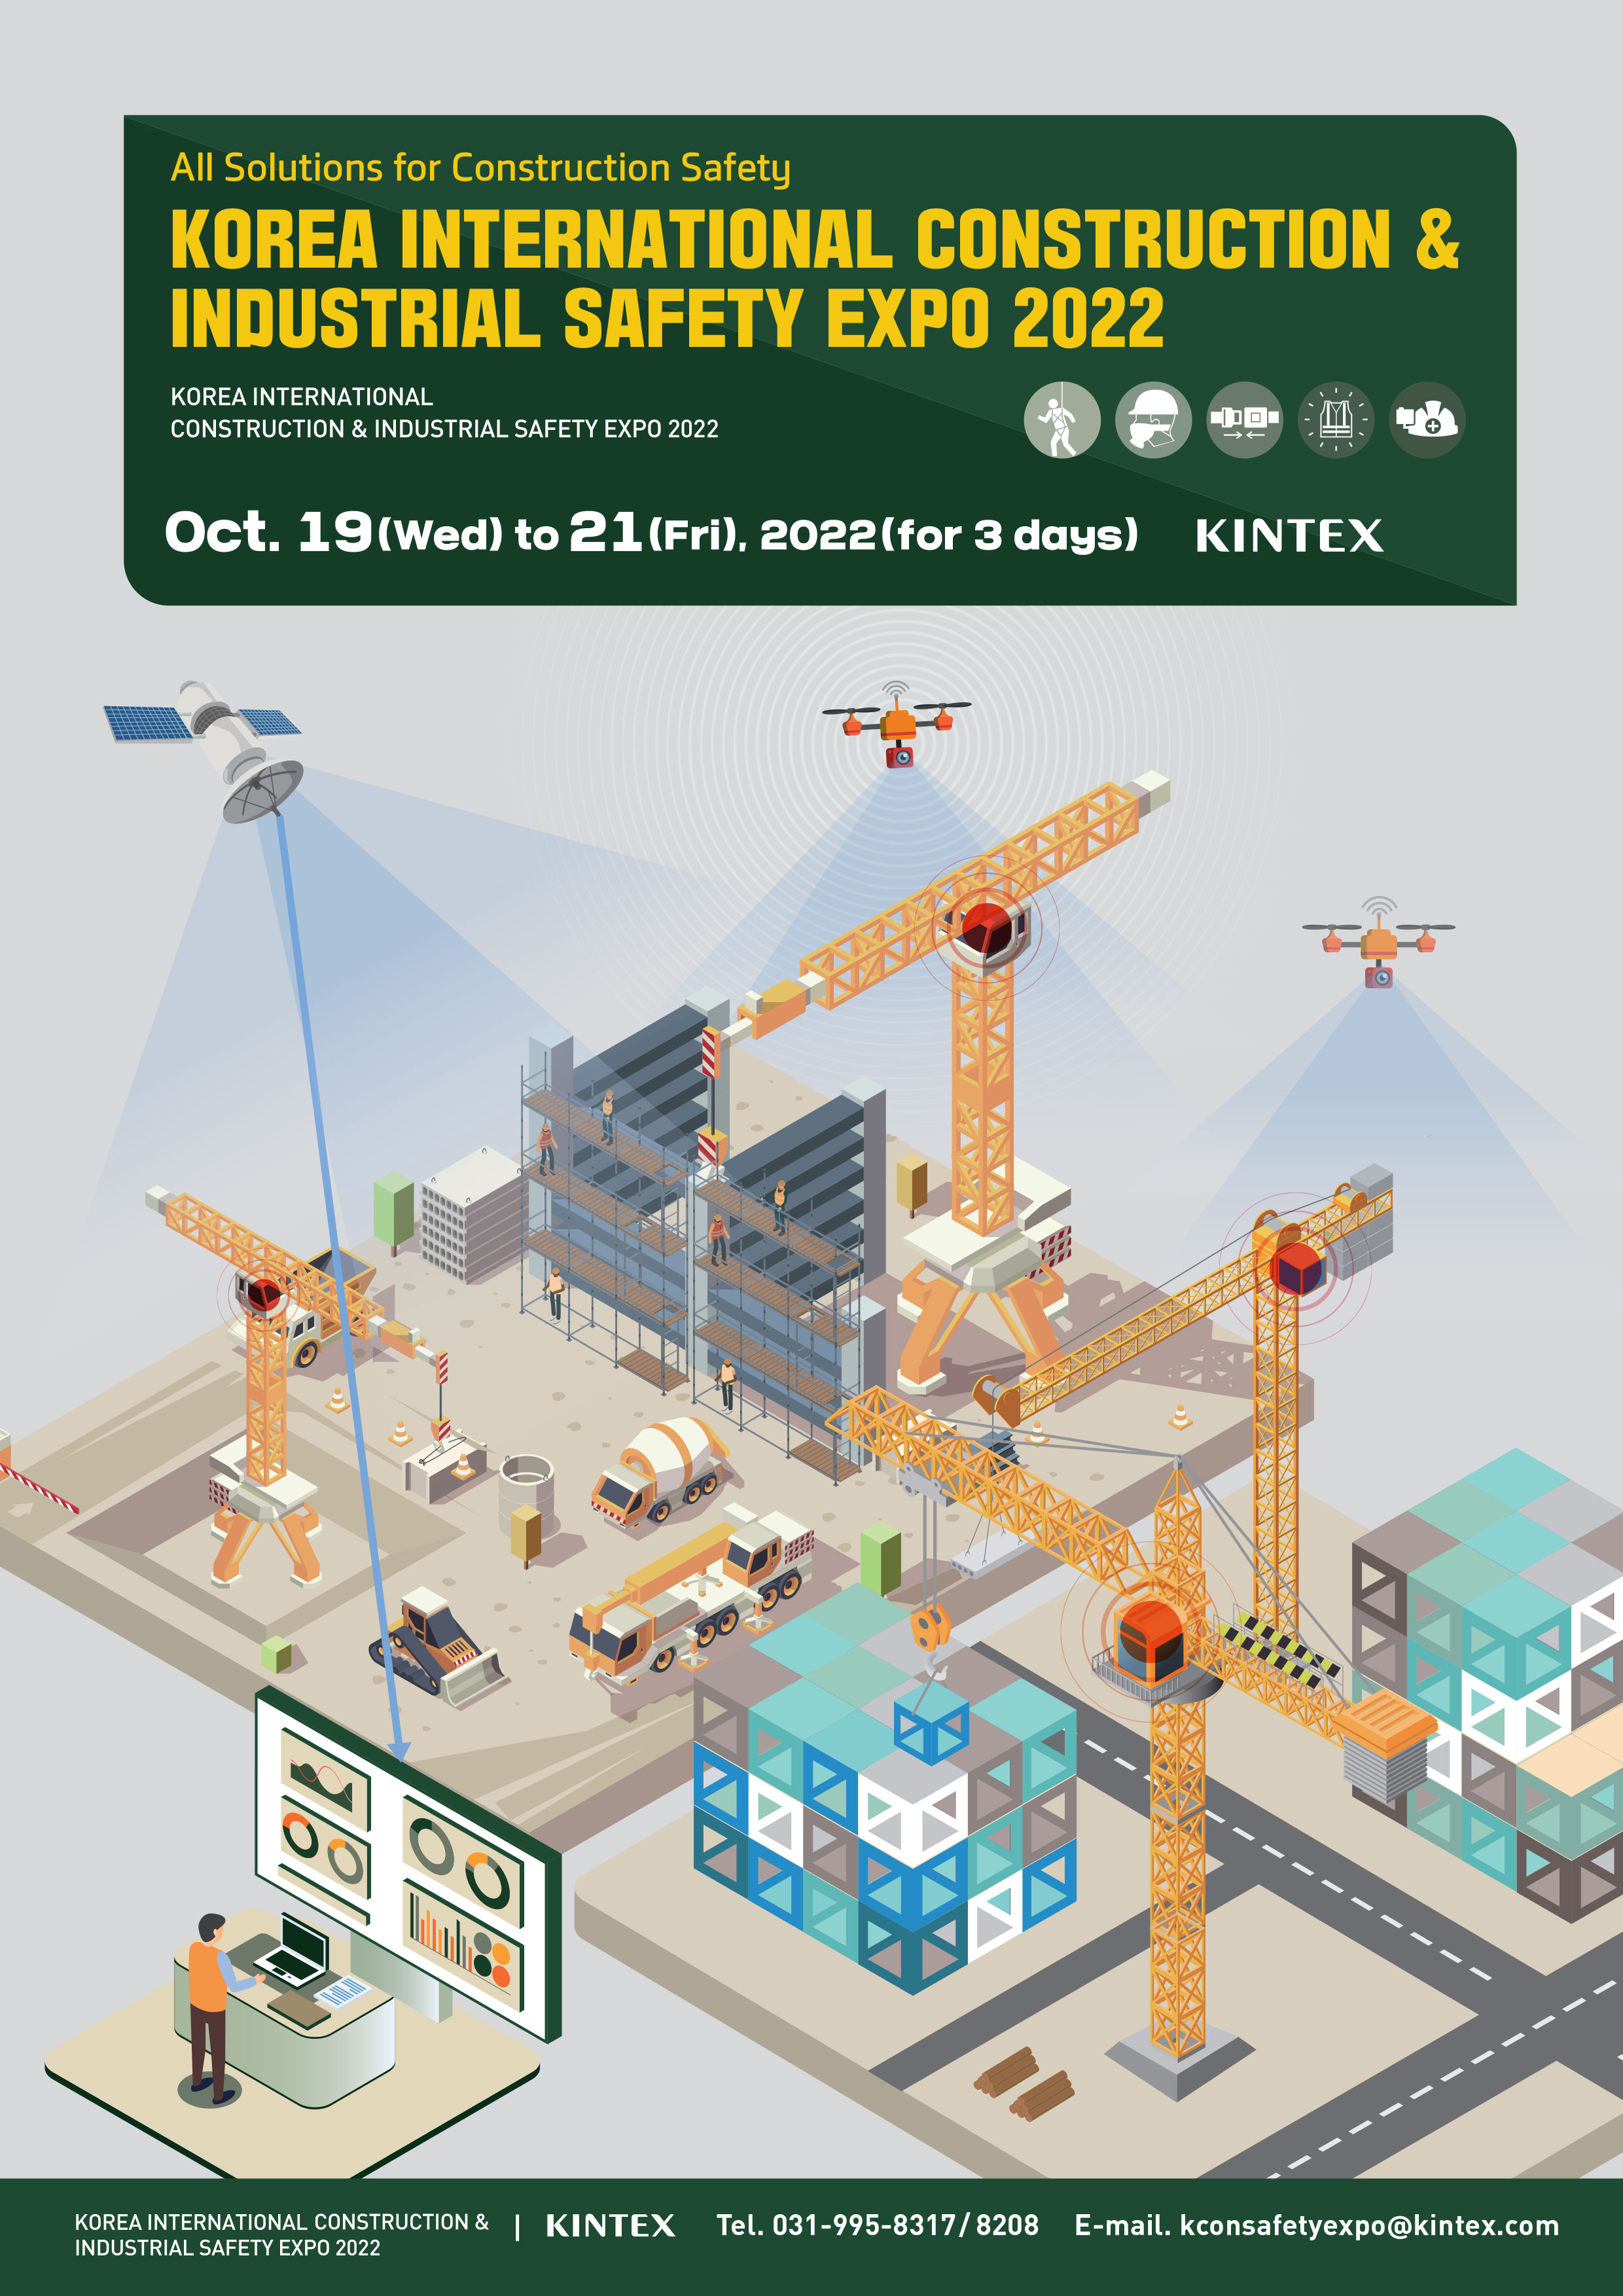 Korea International Construction Industrial Safety Expo 22 Showcasing Innovative Smart Construction And Industrial Safety Solutions At Kintex In October Business Wire